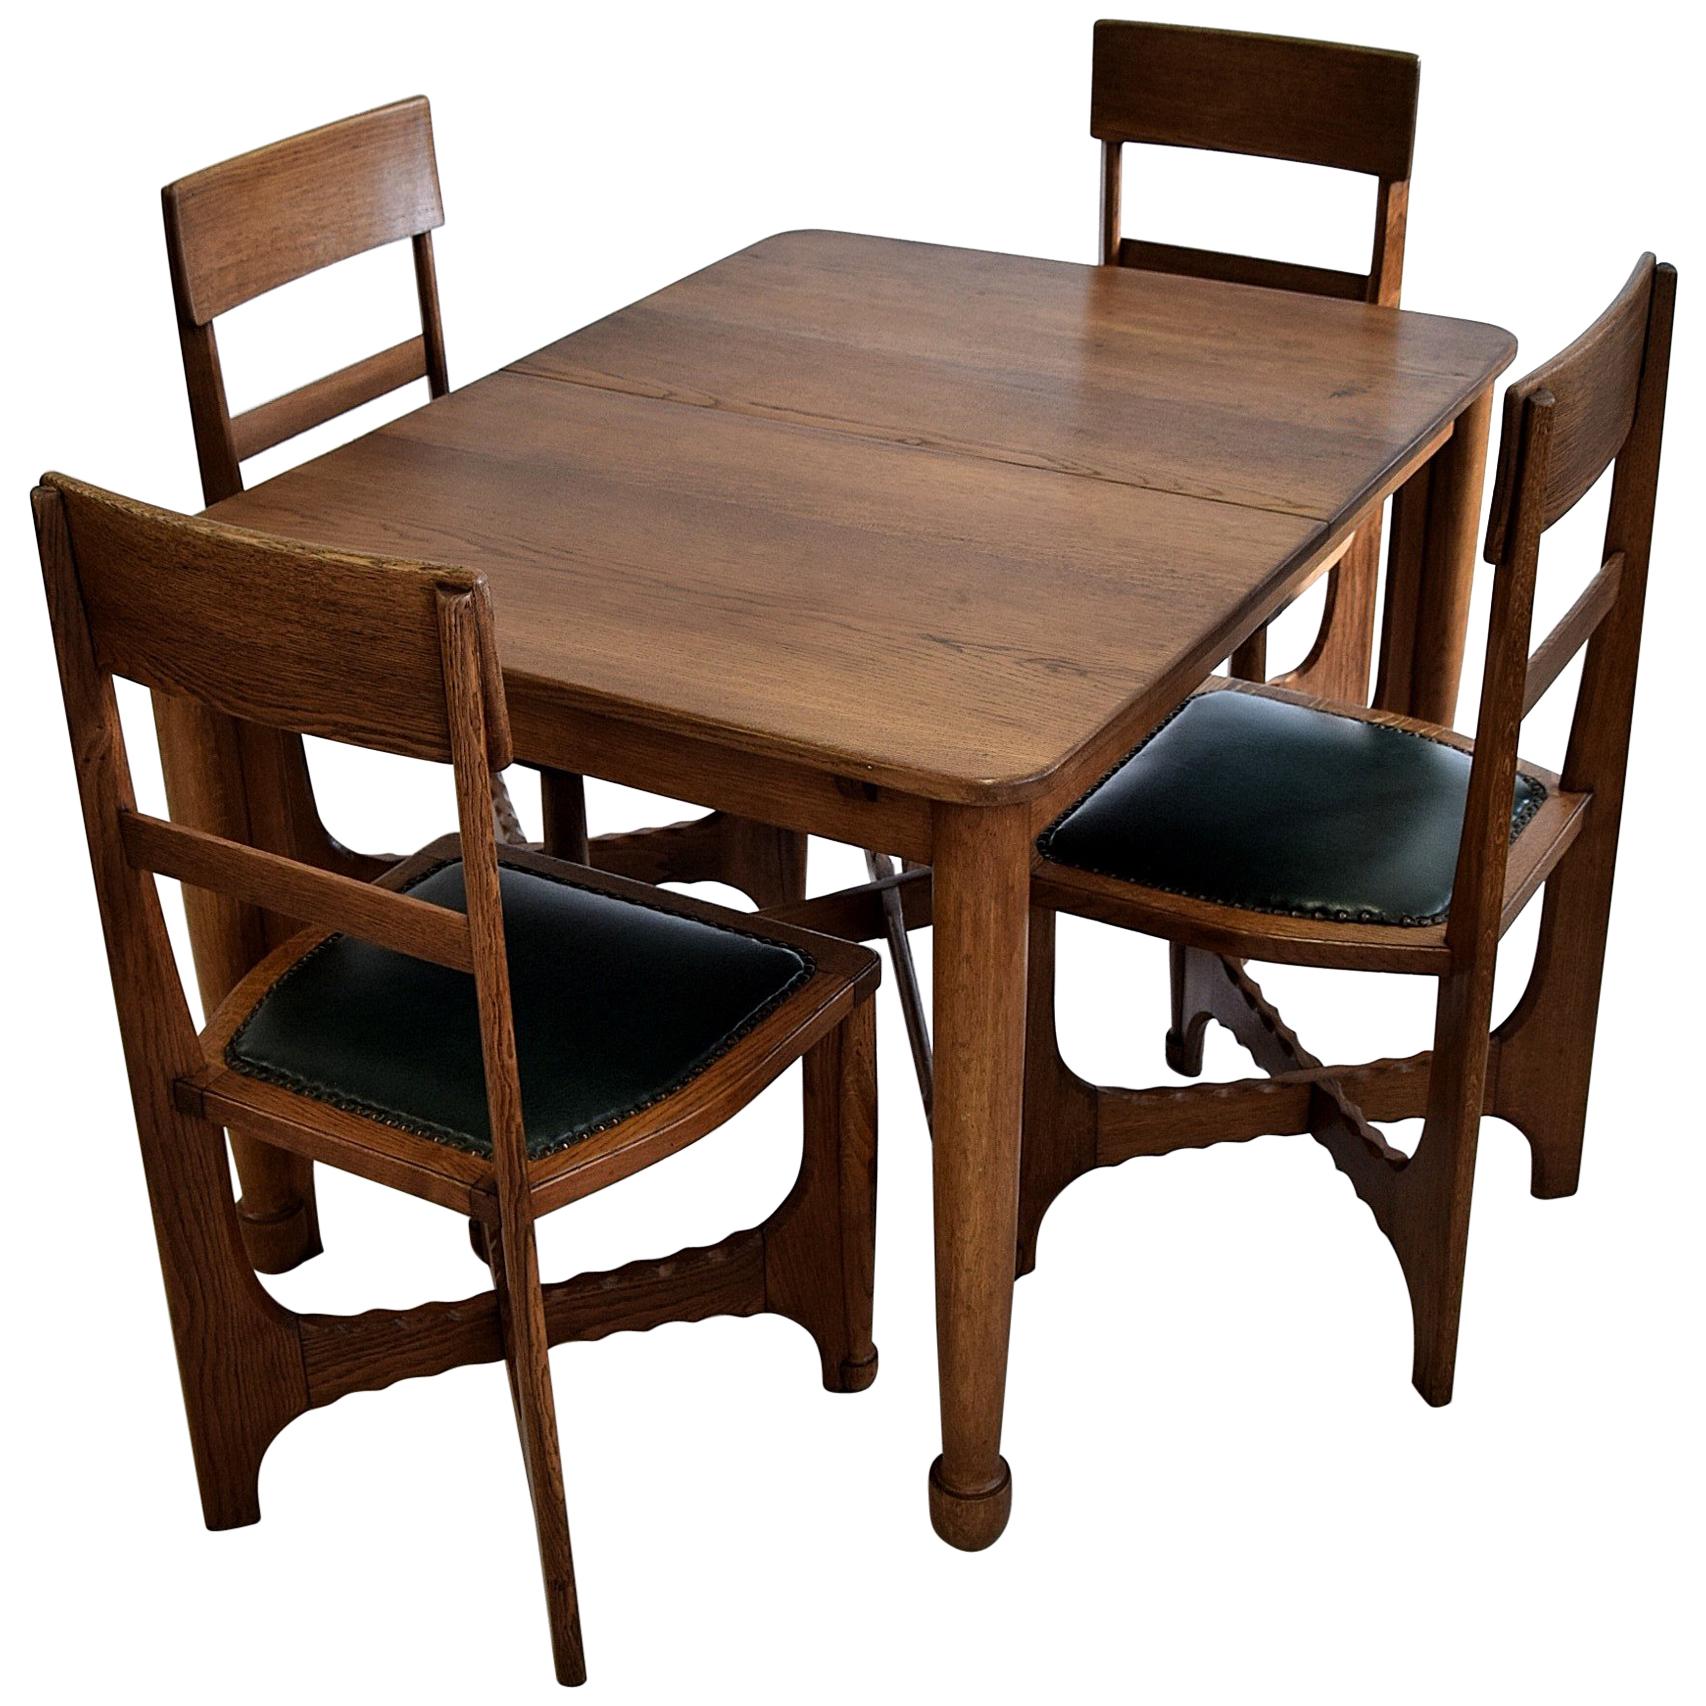 Early 1900s Art and Craft Oak Dining Set